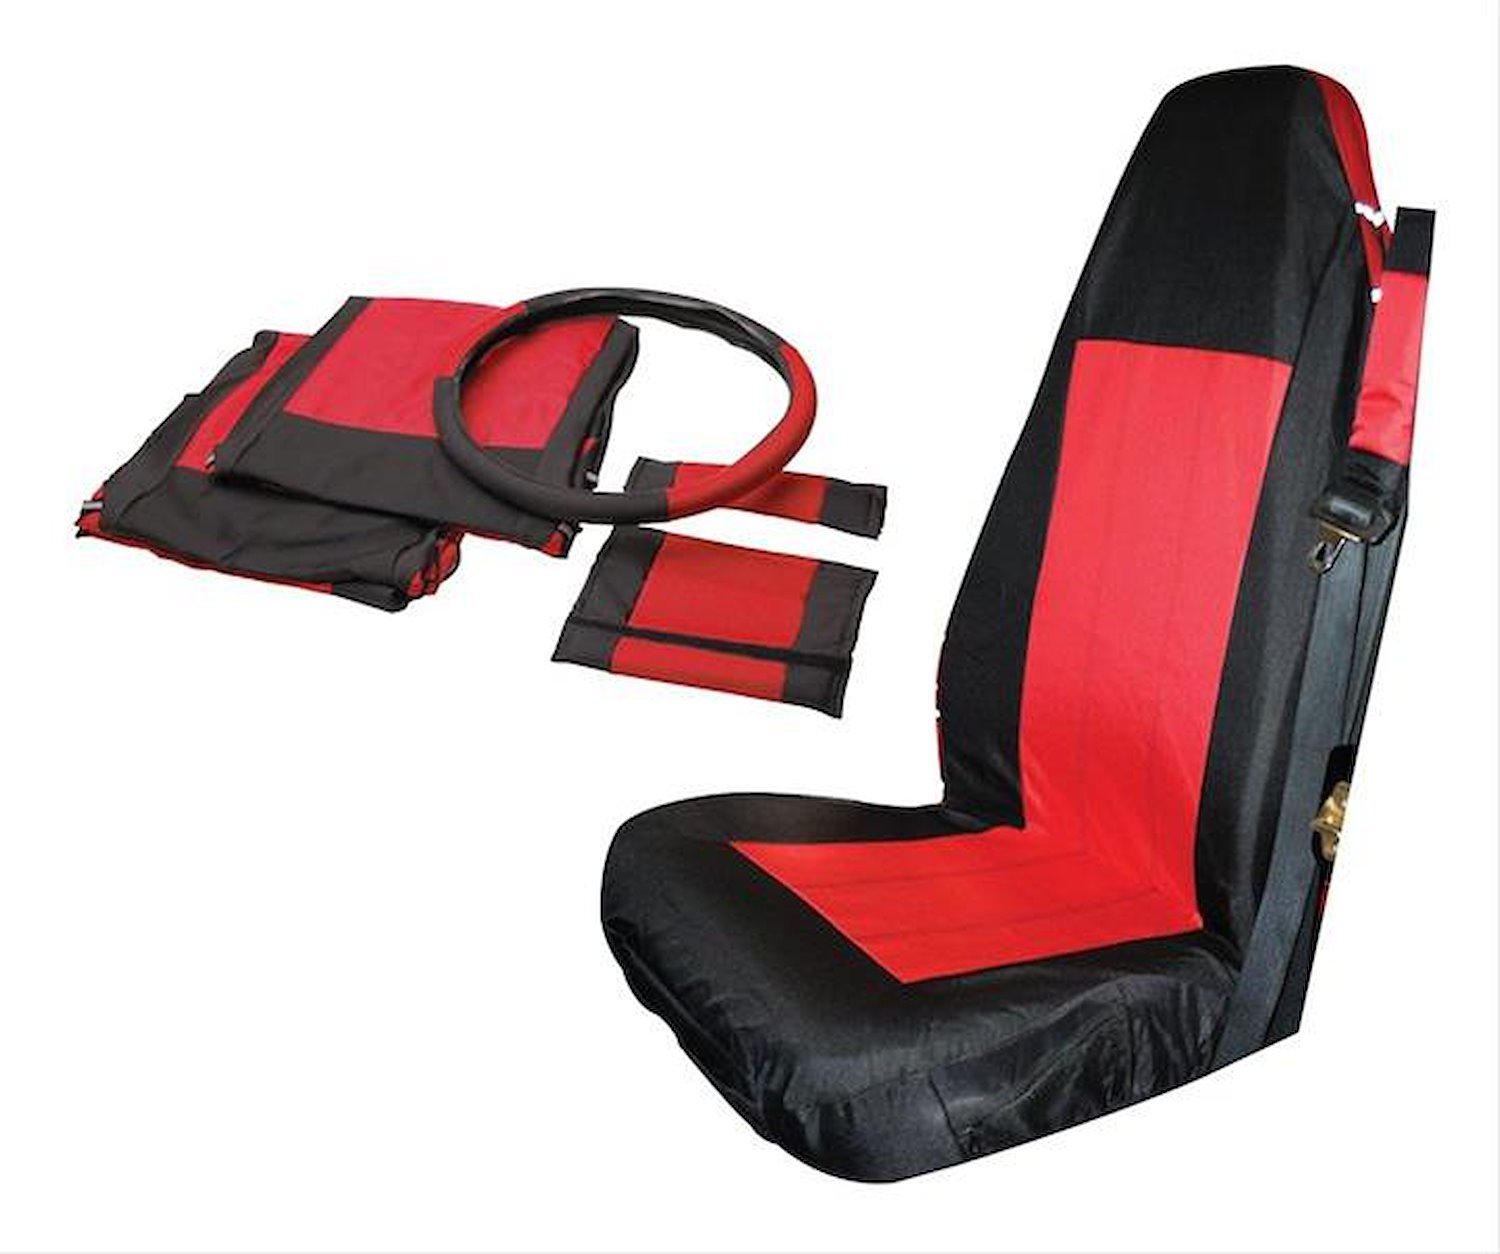 SEAT COVER SET